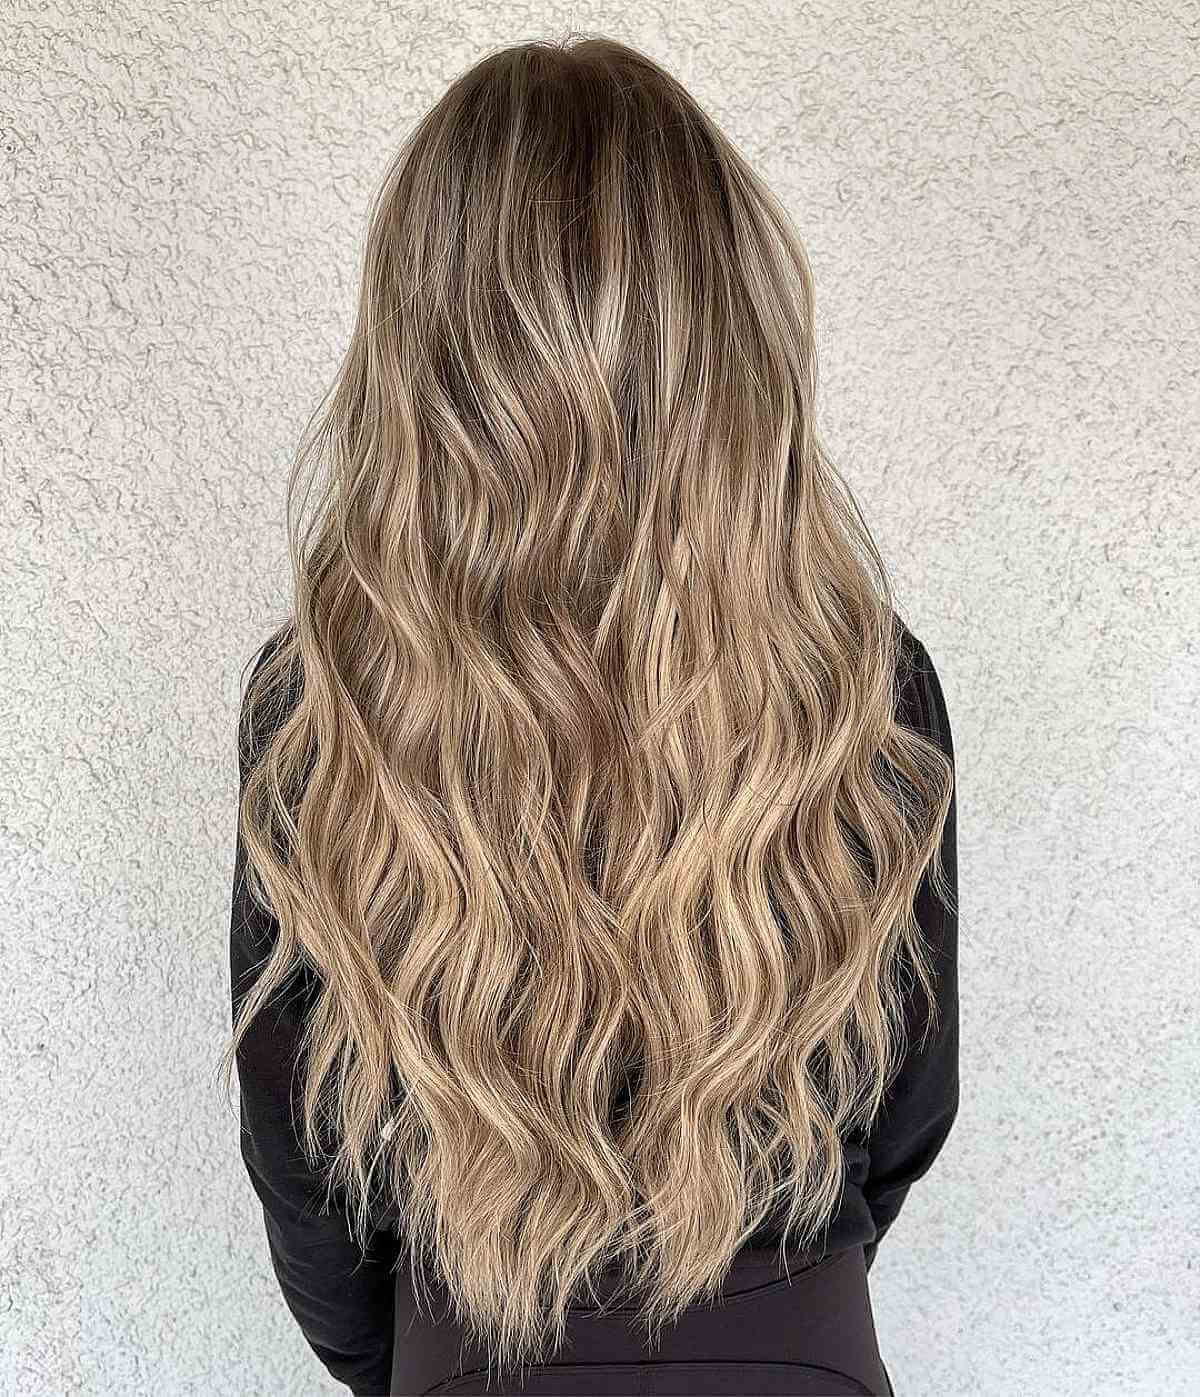 17 Dishwater Blonde Hair Colors You'll Want to Show Your Hair Colorist